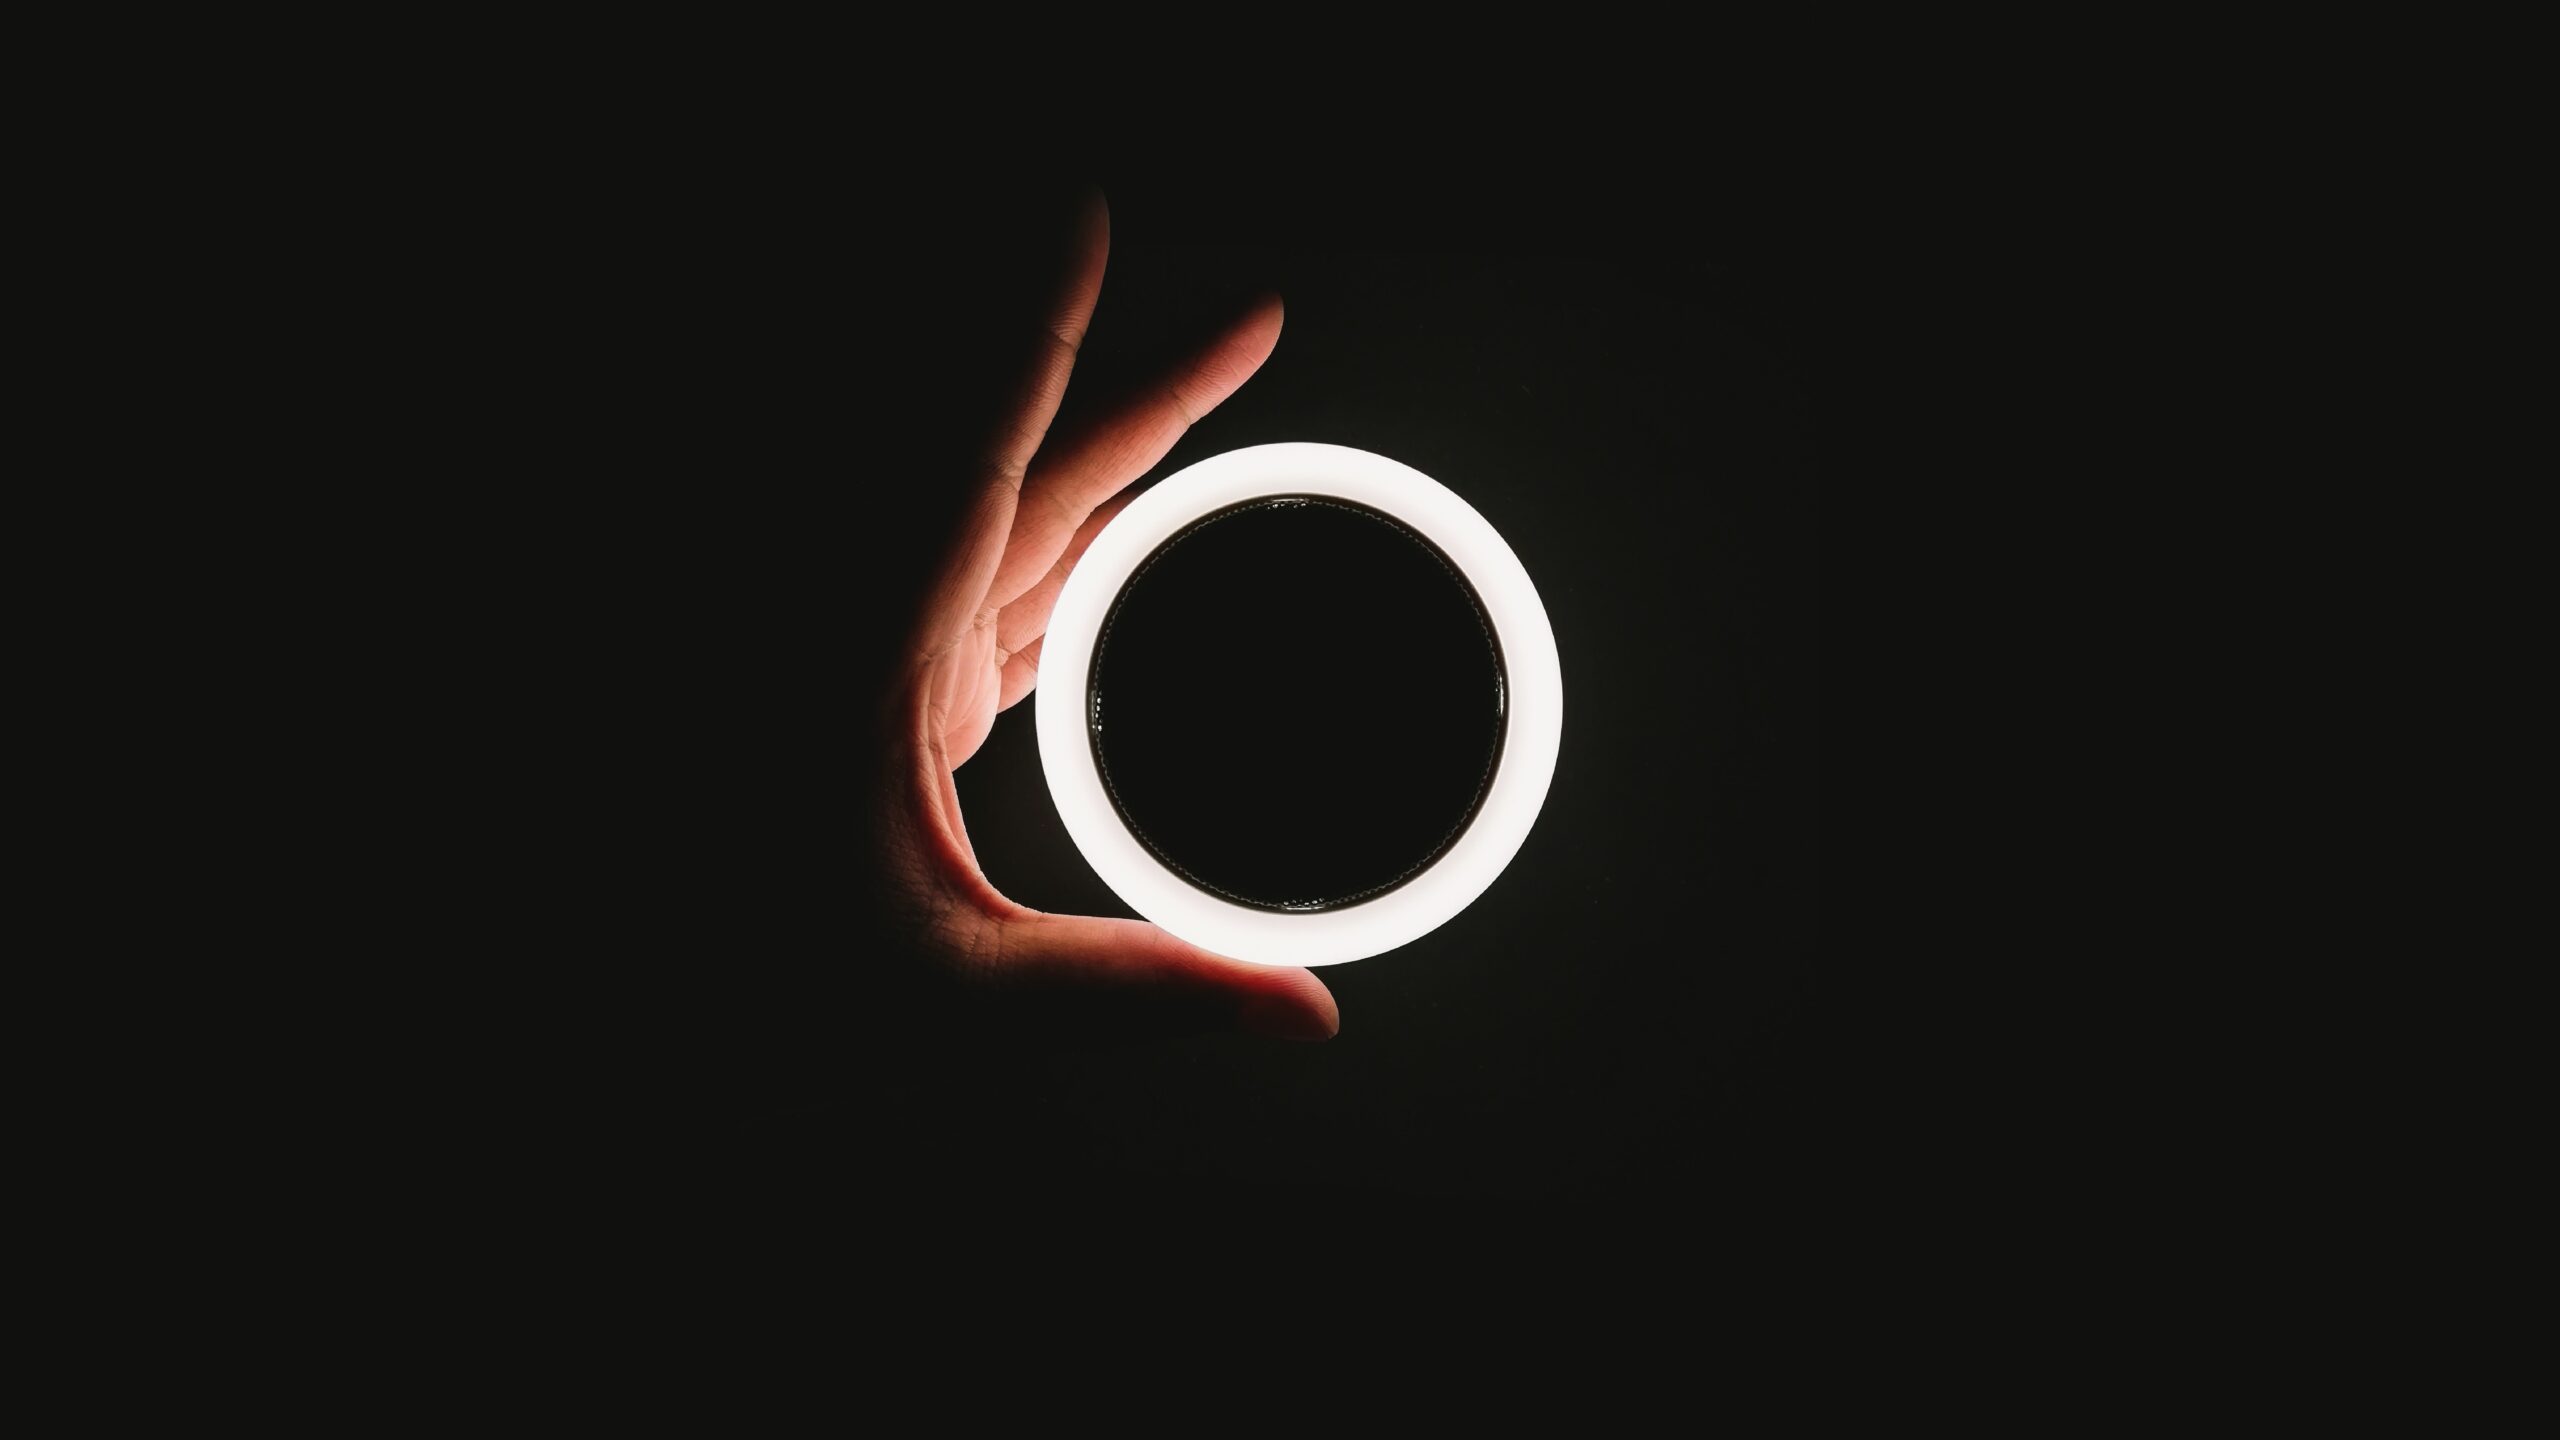 Black background with white hand holding a glowing ring light